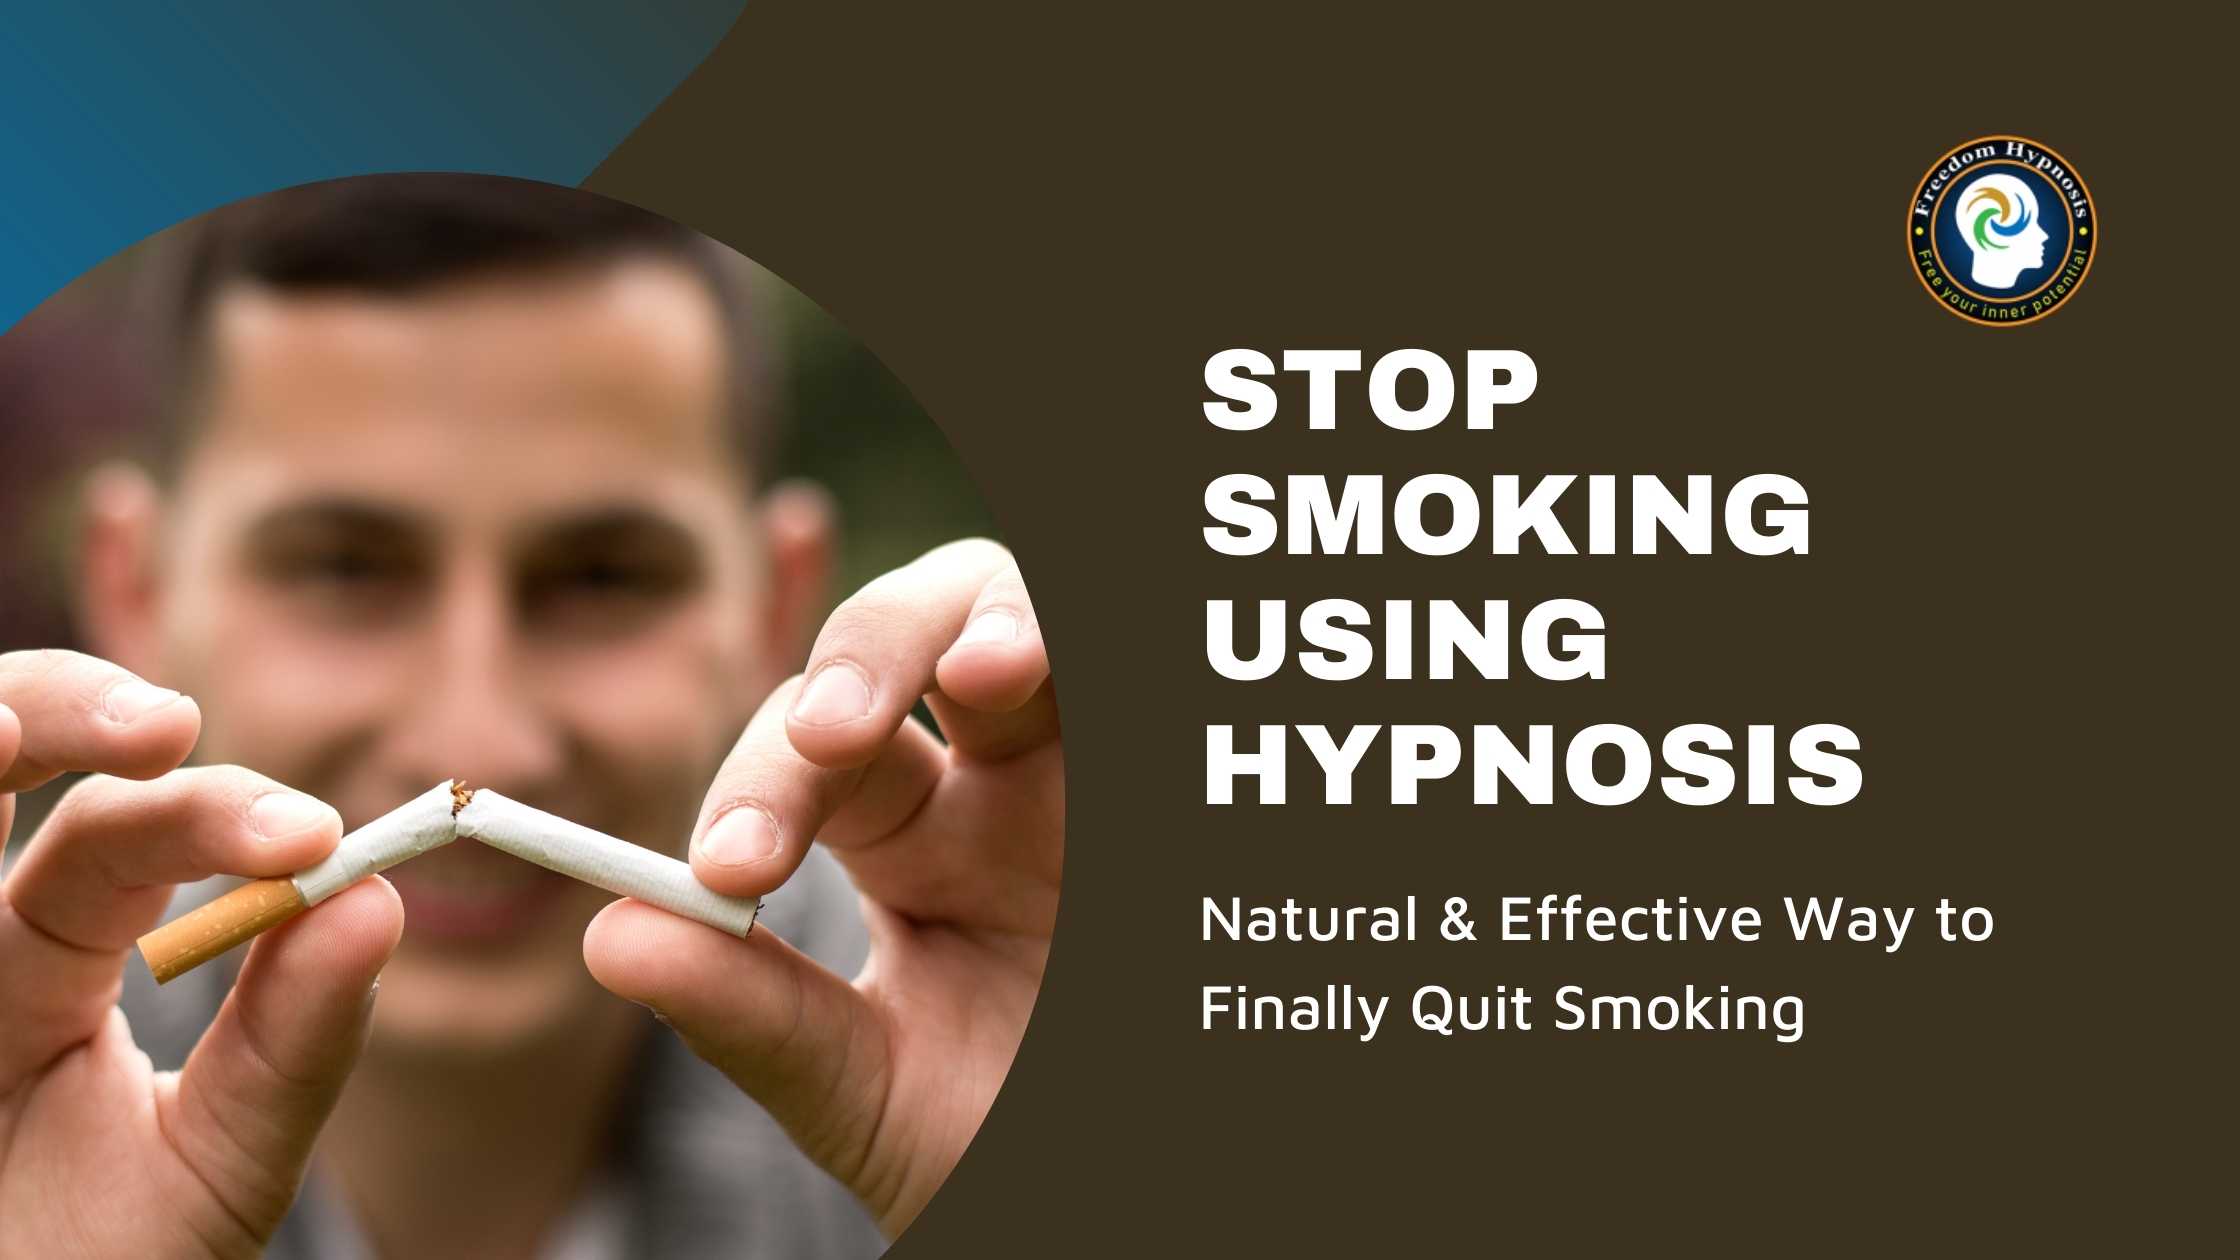 man who stop smoking permanently through hypnosis NYC sessions